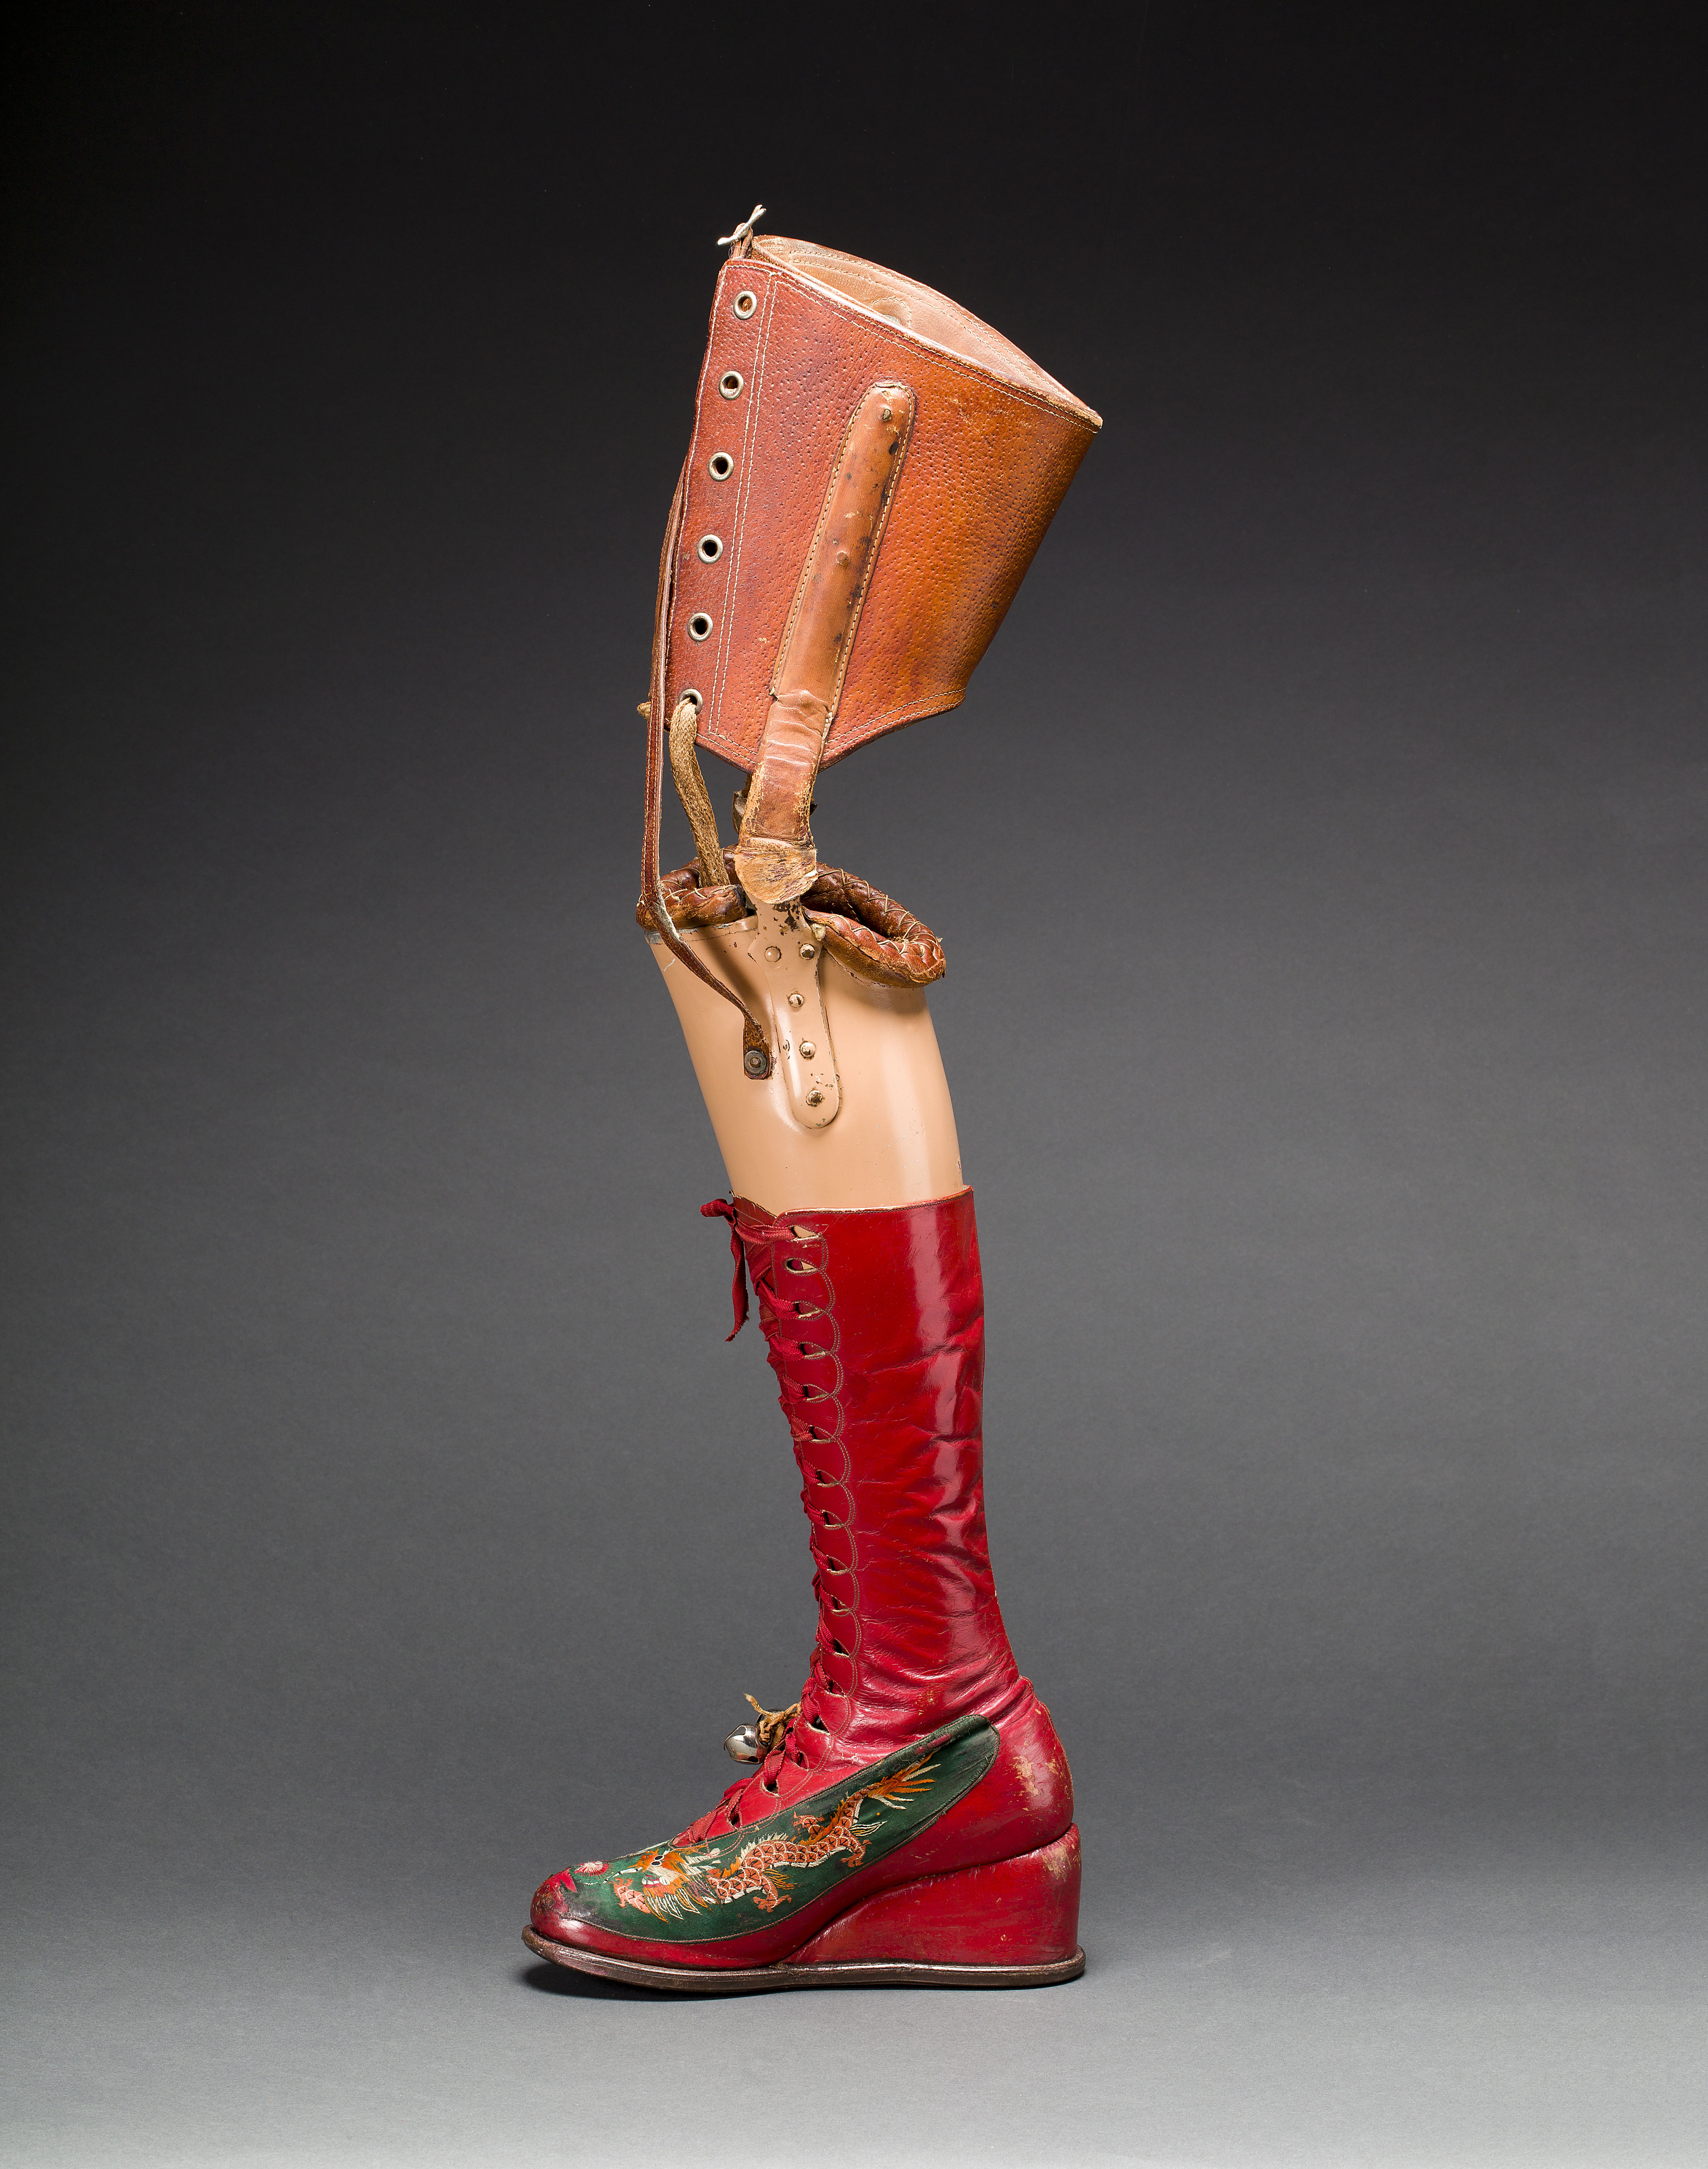 Prosthetic leg with leather boot. Appliquéd silk with embroidered Chinese motifs. Photograph Javier Hinojosa. Museo Frida Kahlo. © Diego Riviera and Frida Kahlo Archives, Banco de México, Fiduciary of the Trust of the Diego Riviera and Frida Kahlo Museums.